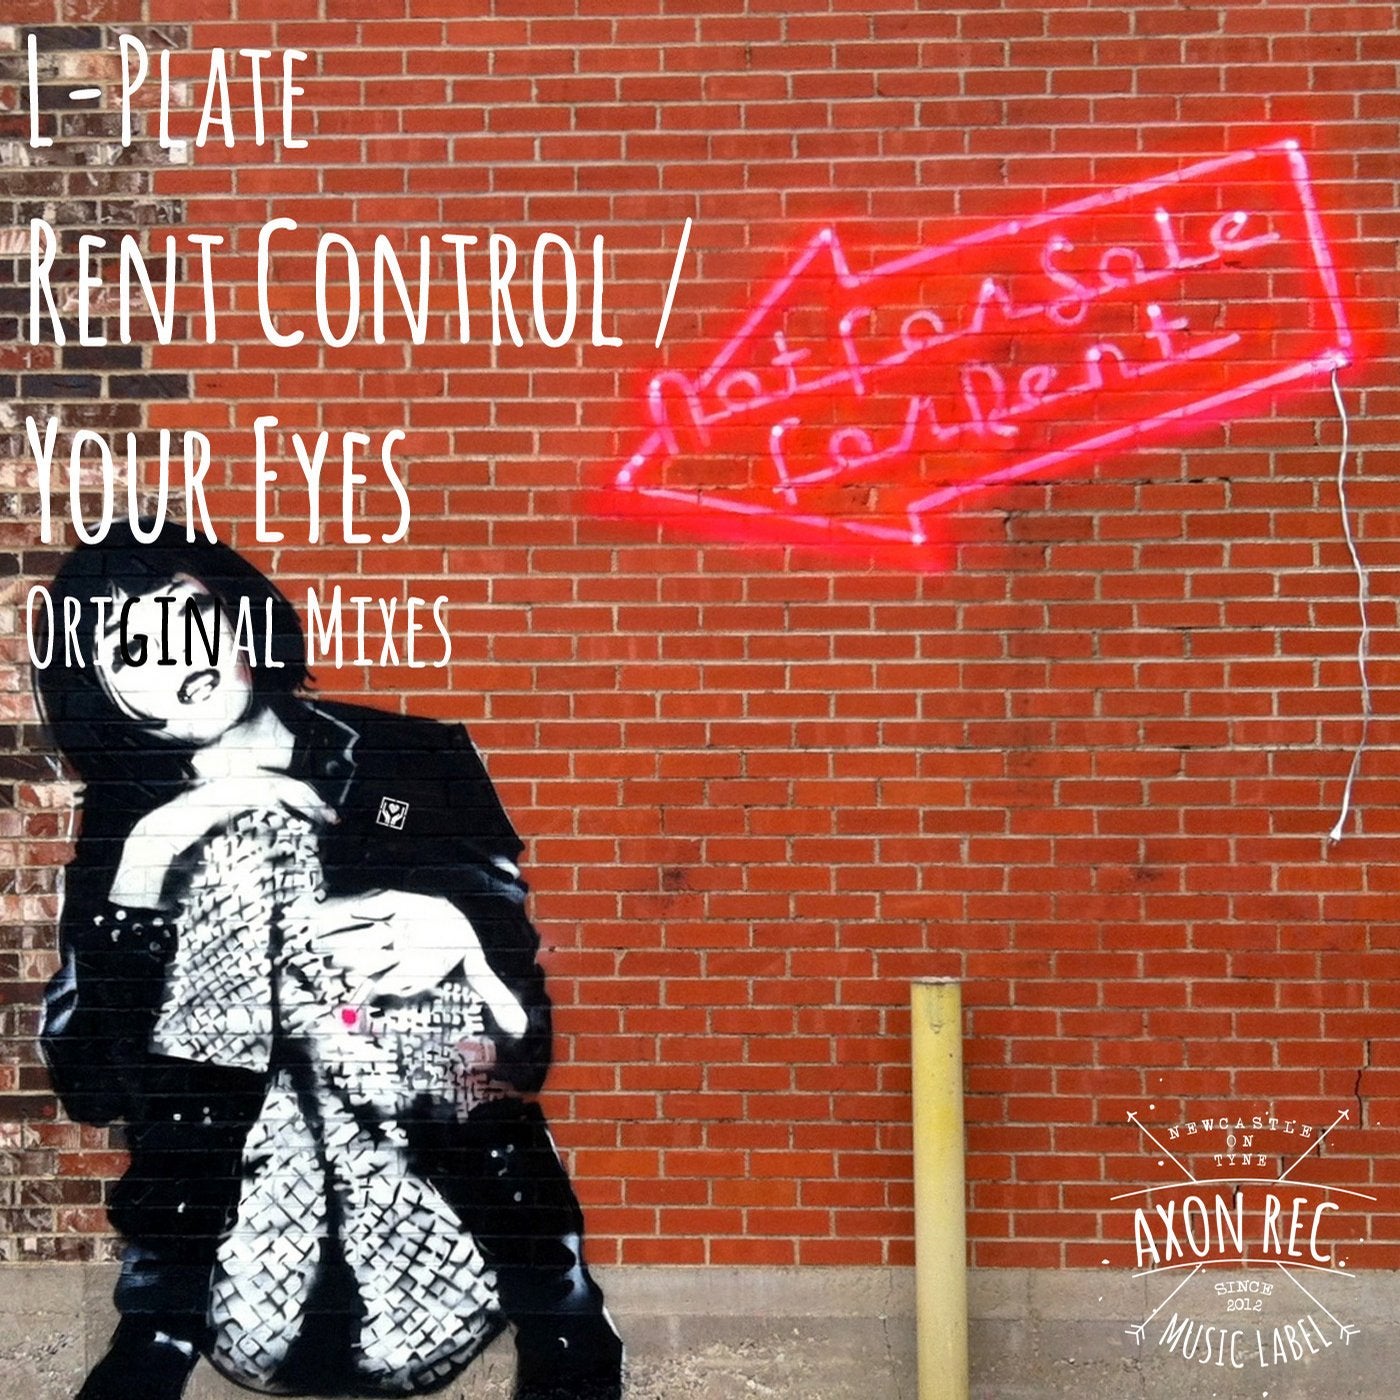 Rent Control / Your Eyes